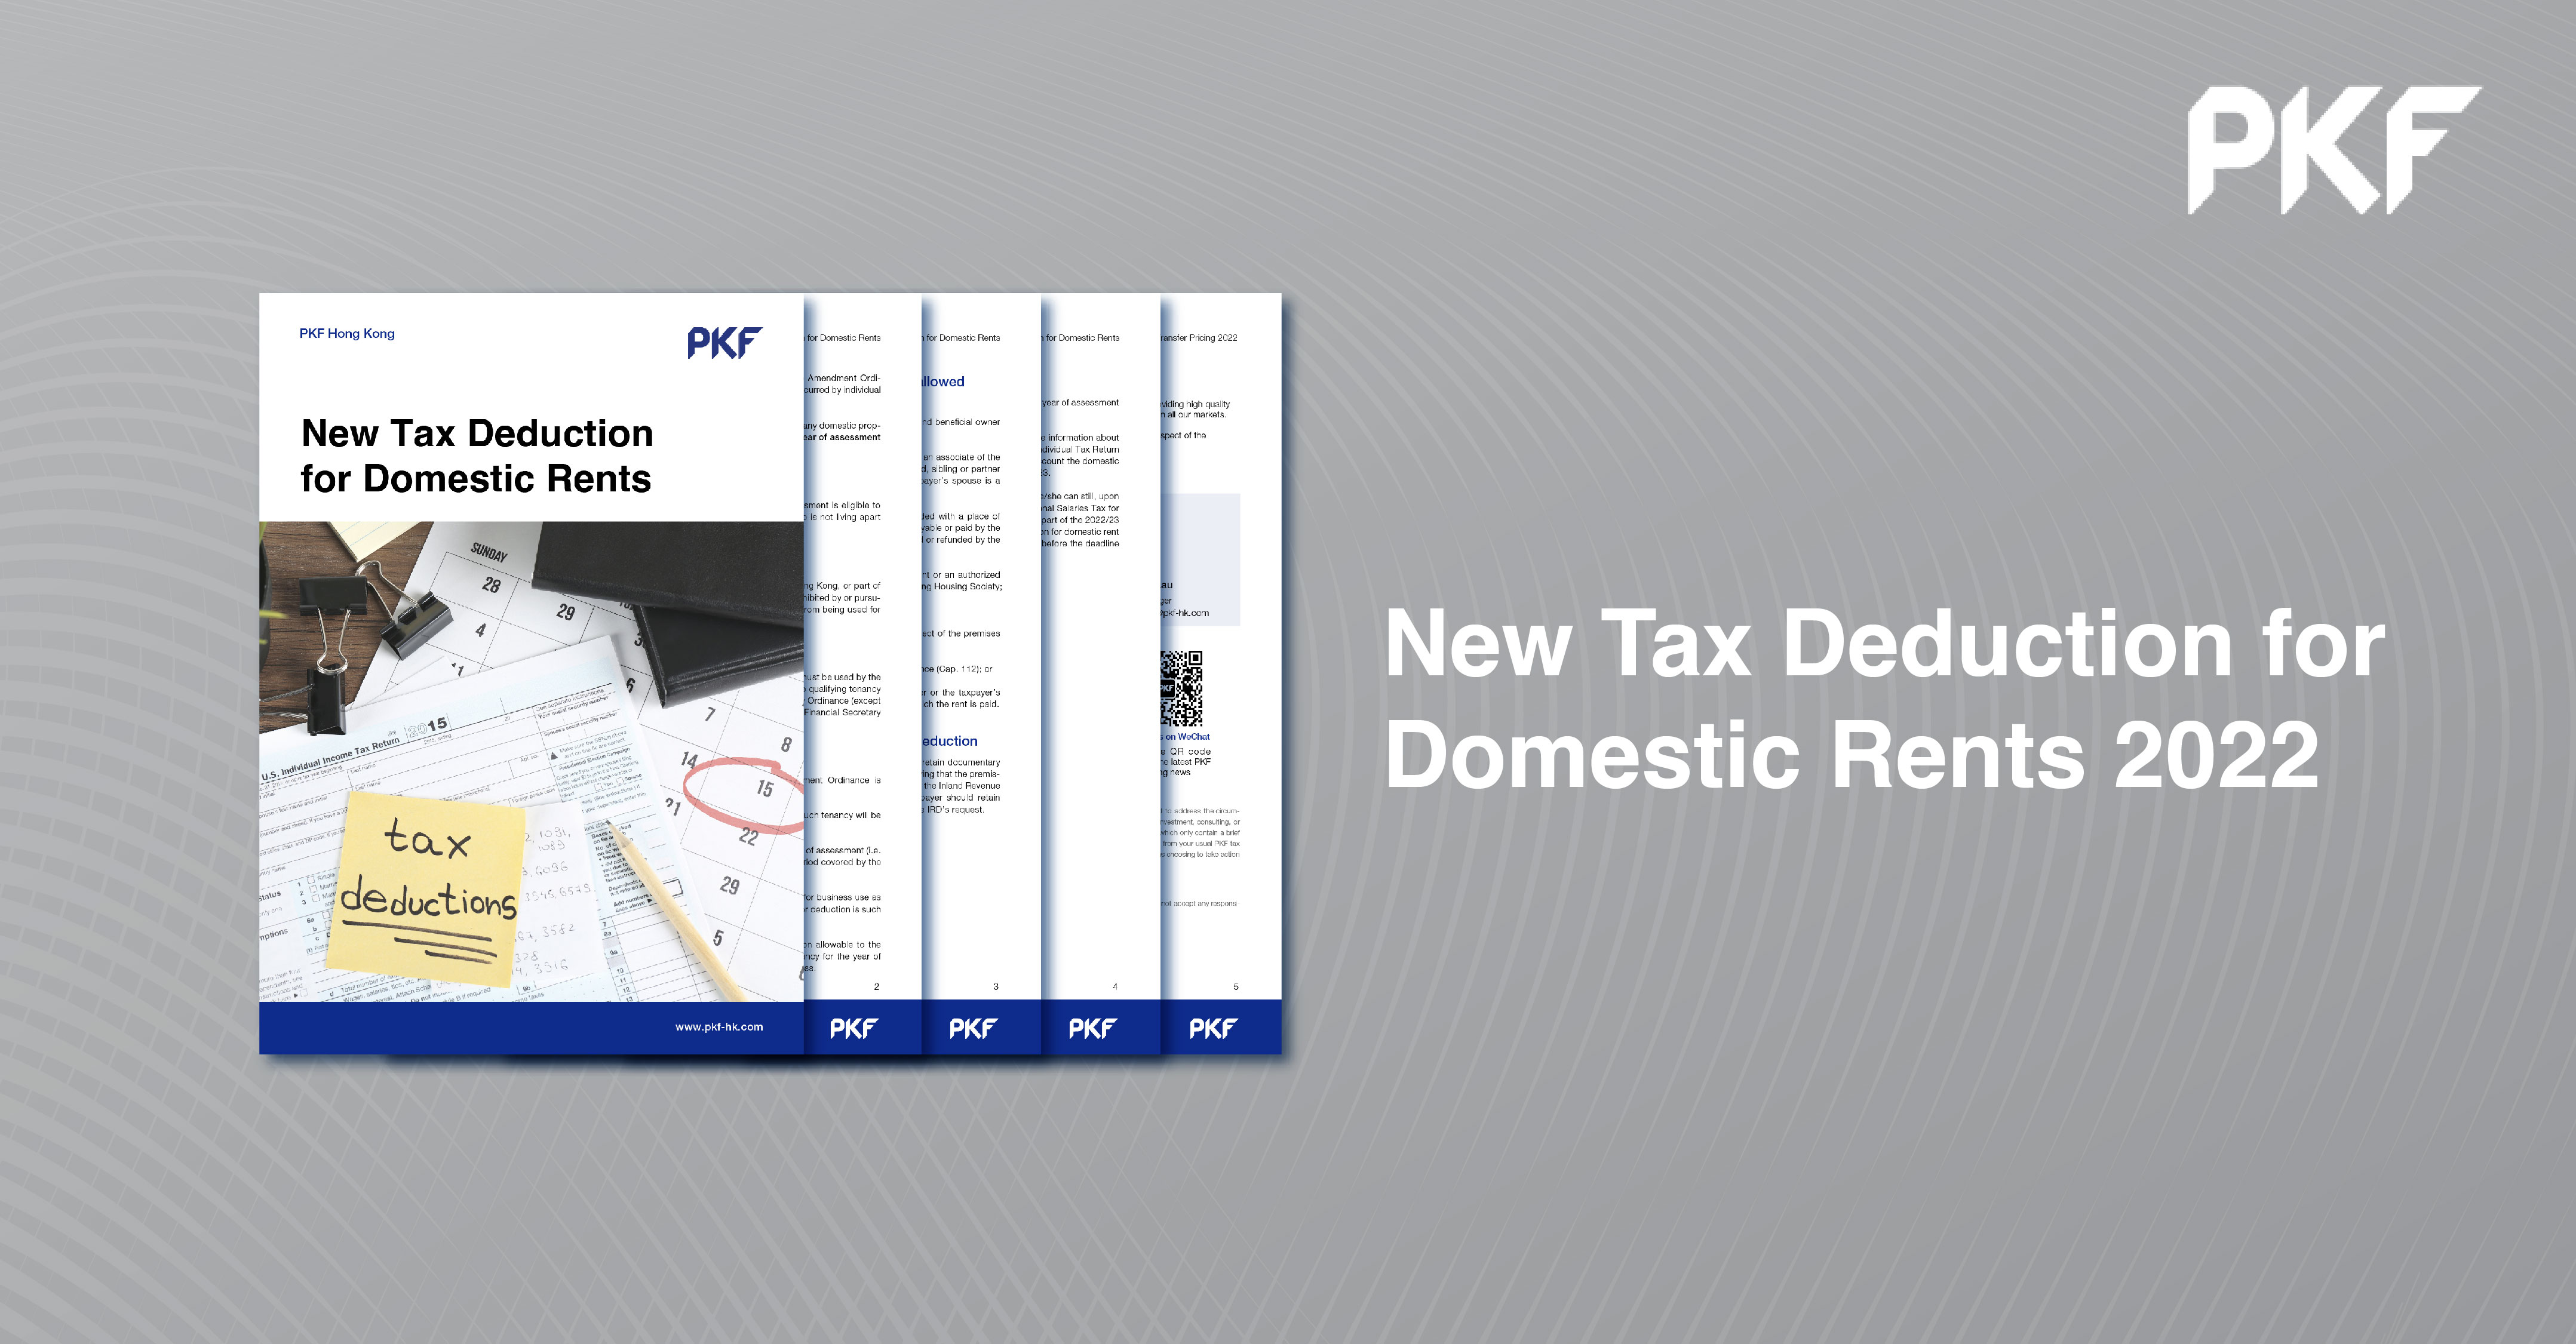 New Tax Deduction for Domestic Rents 2022